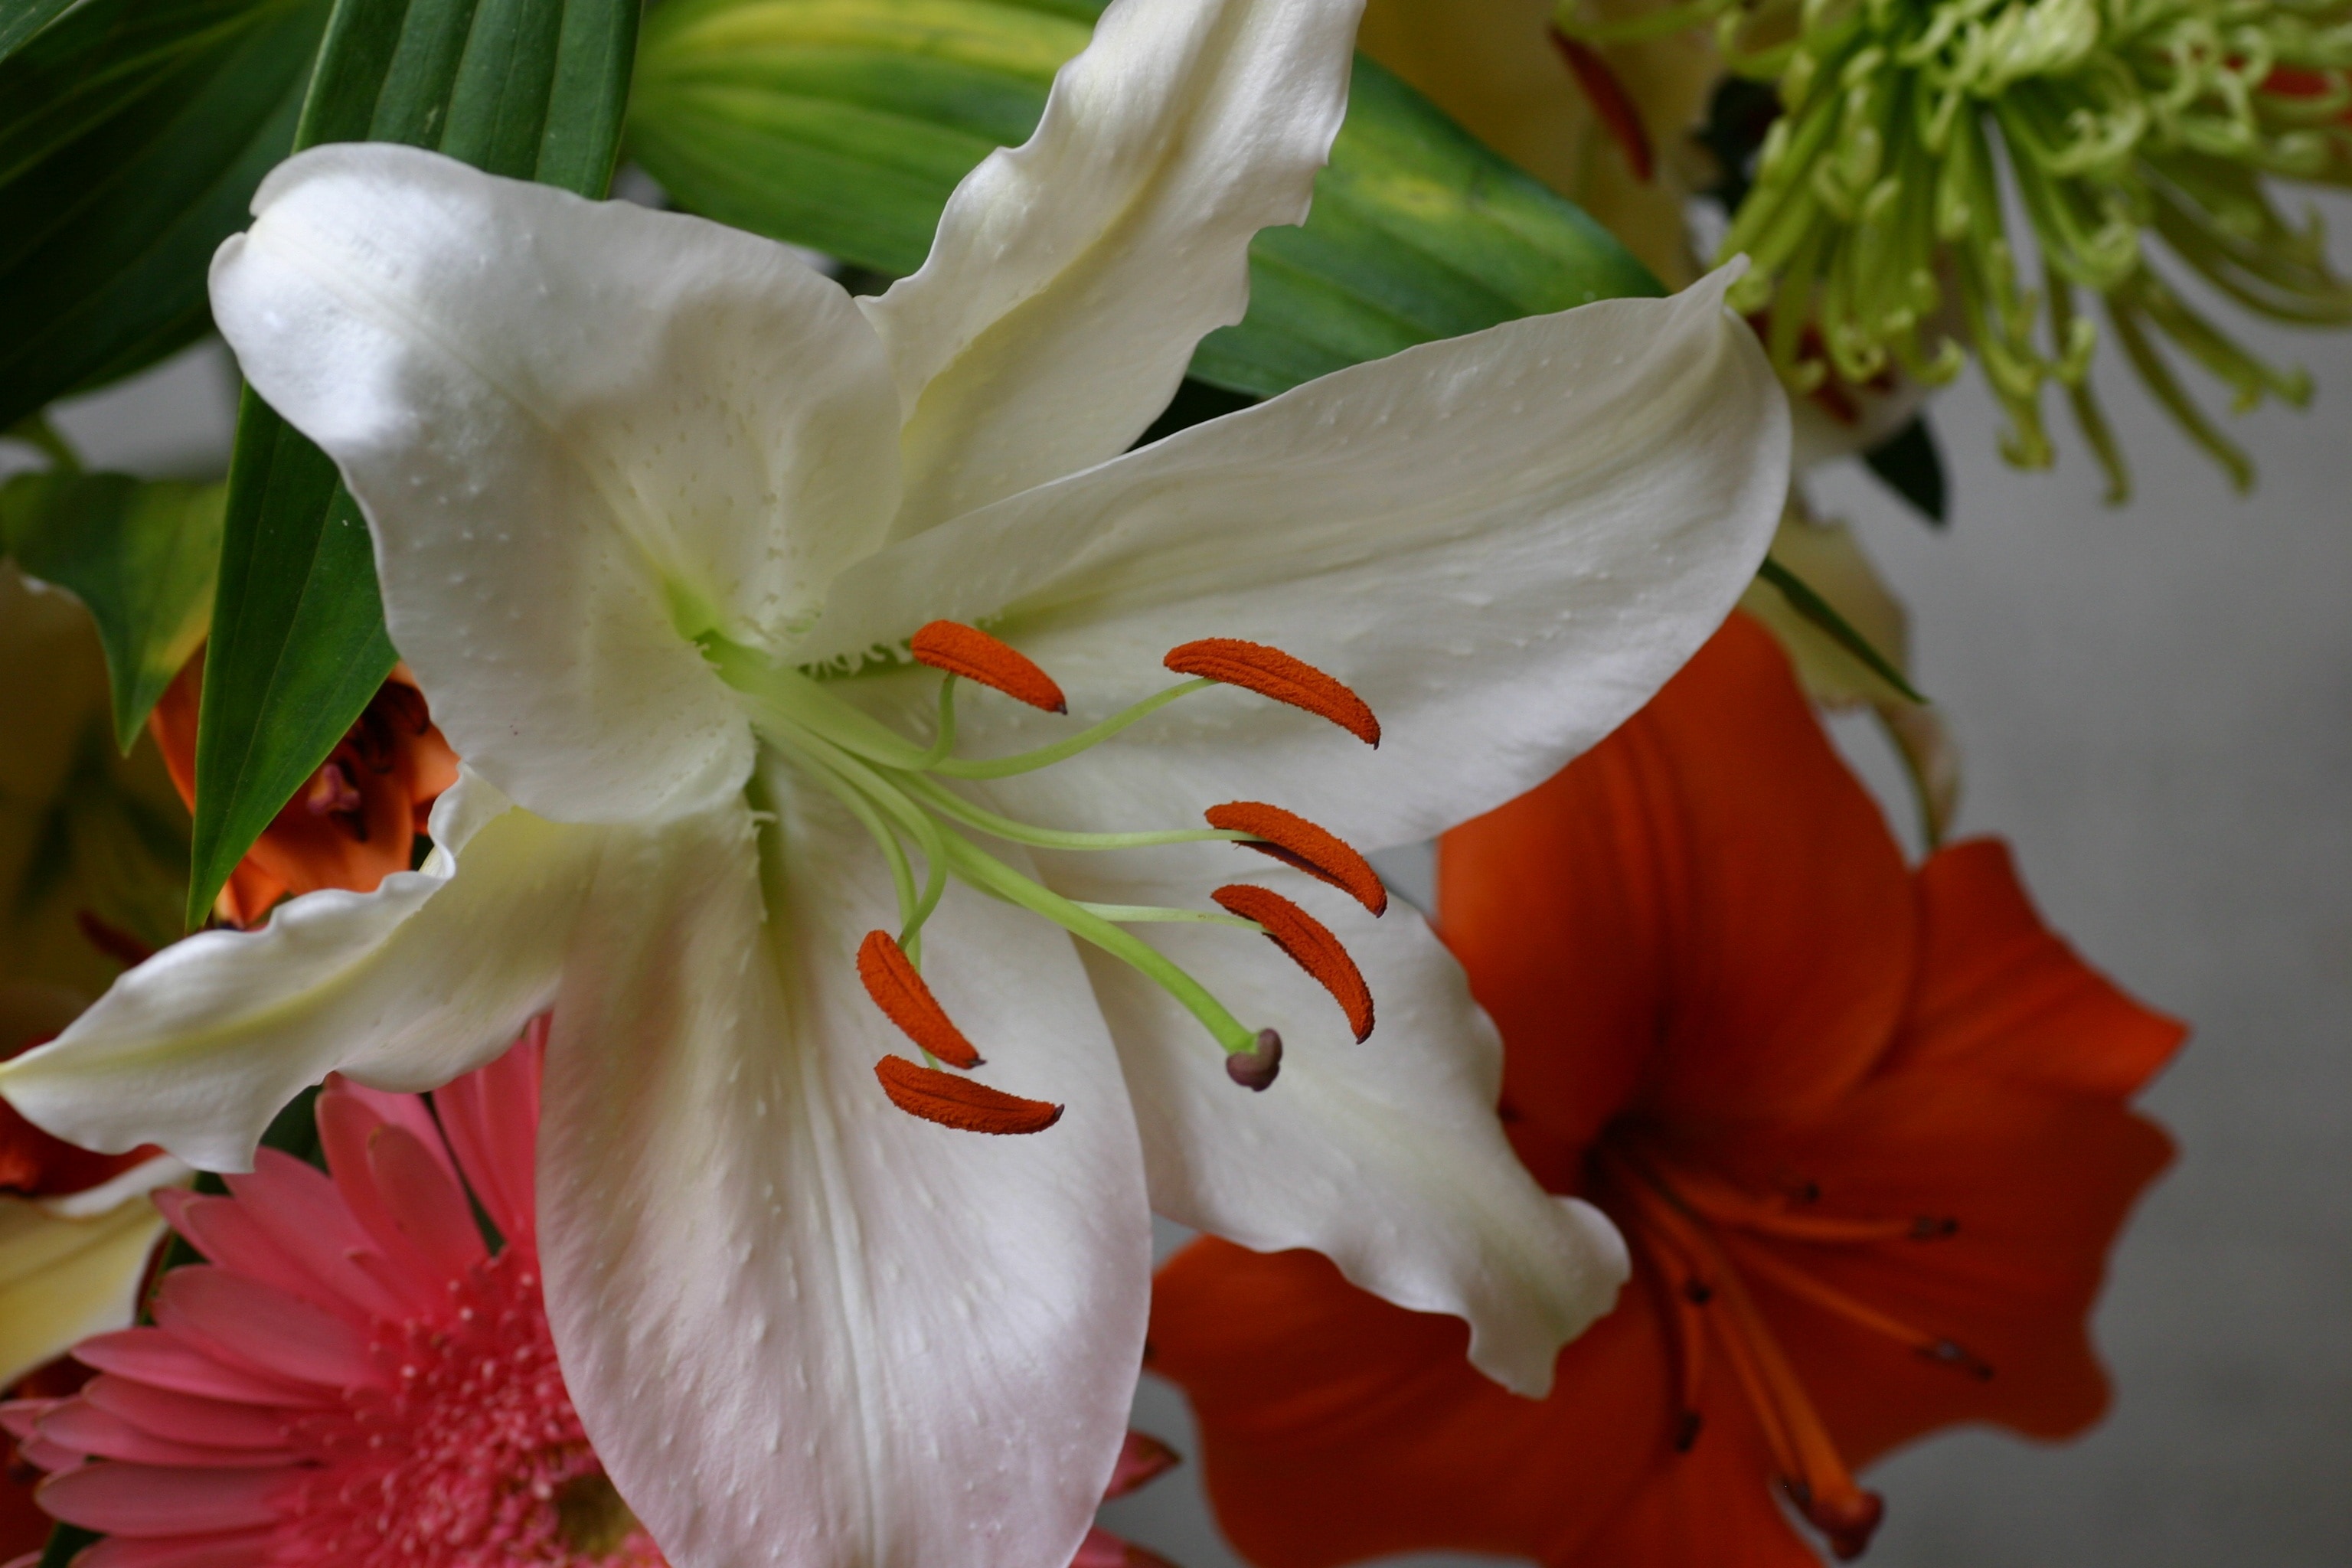 white lilies with red stigmas